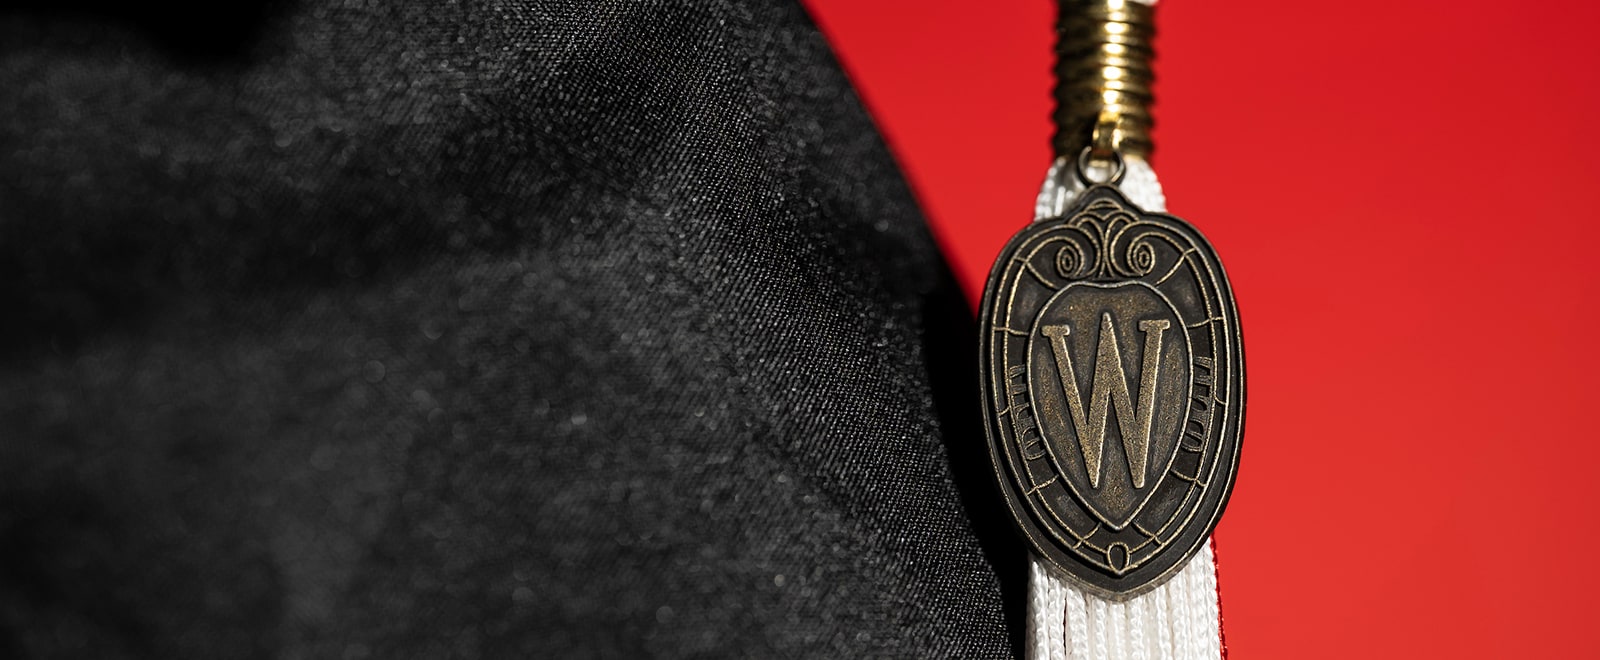 Close-up image of a UW Crest pendant on the tassel of a mortarboard.